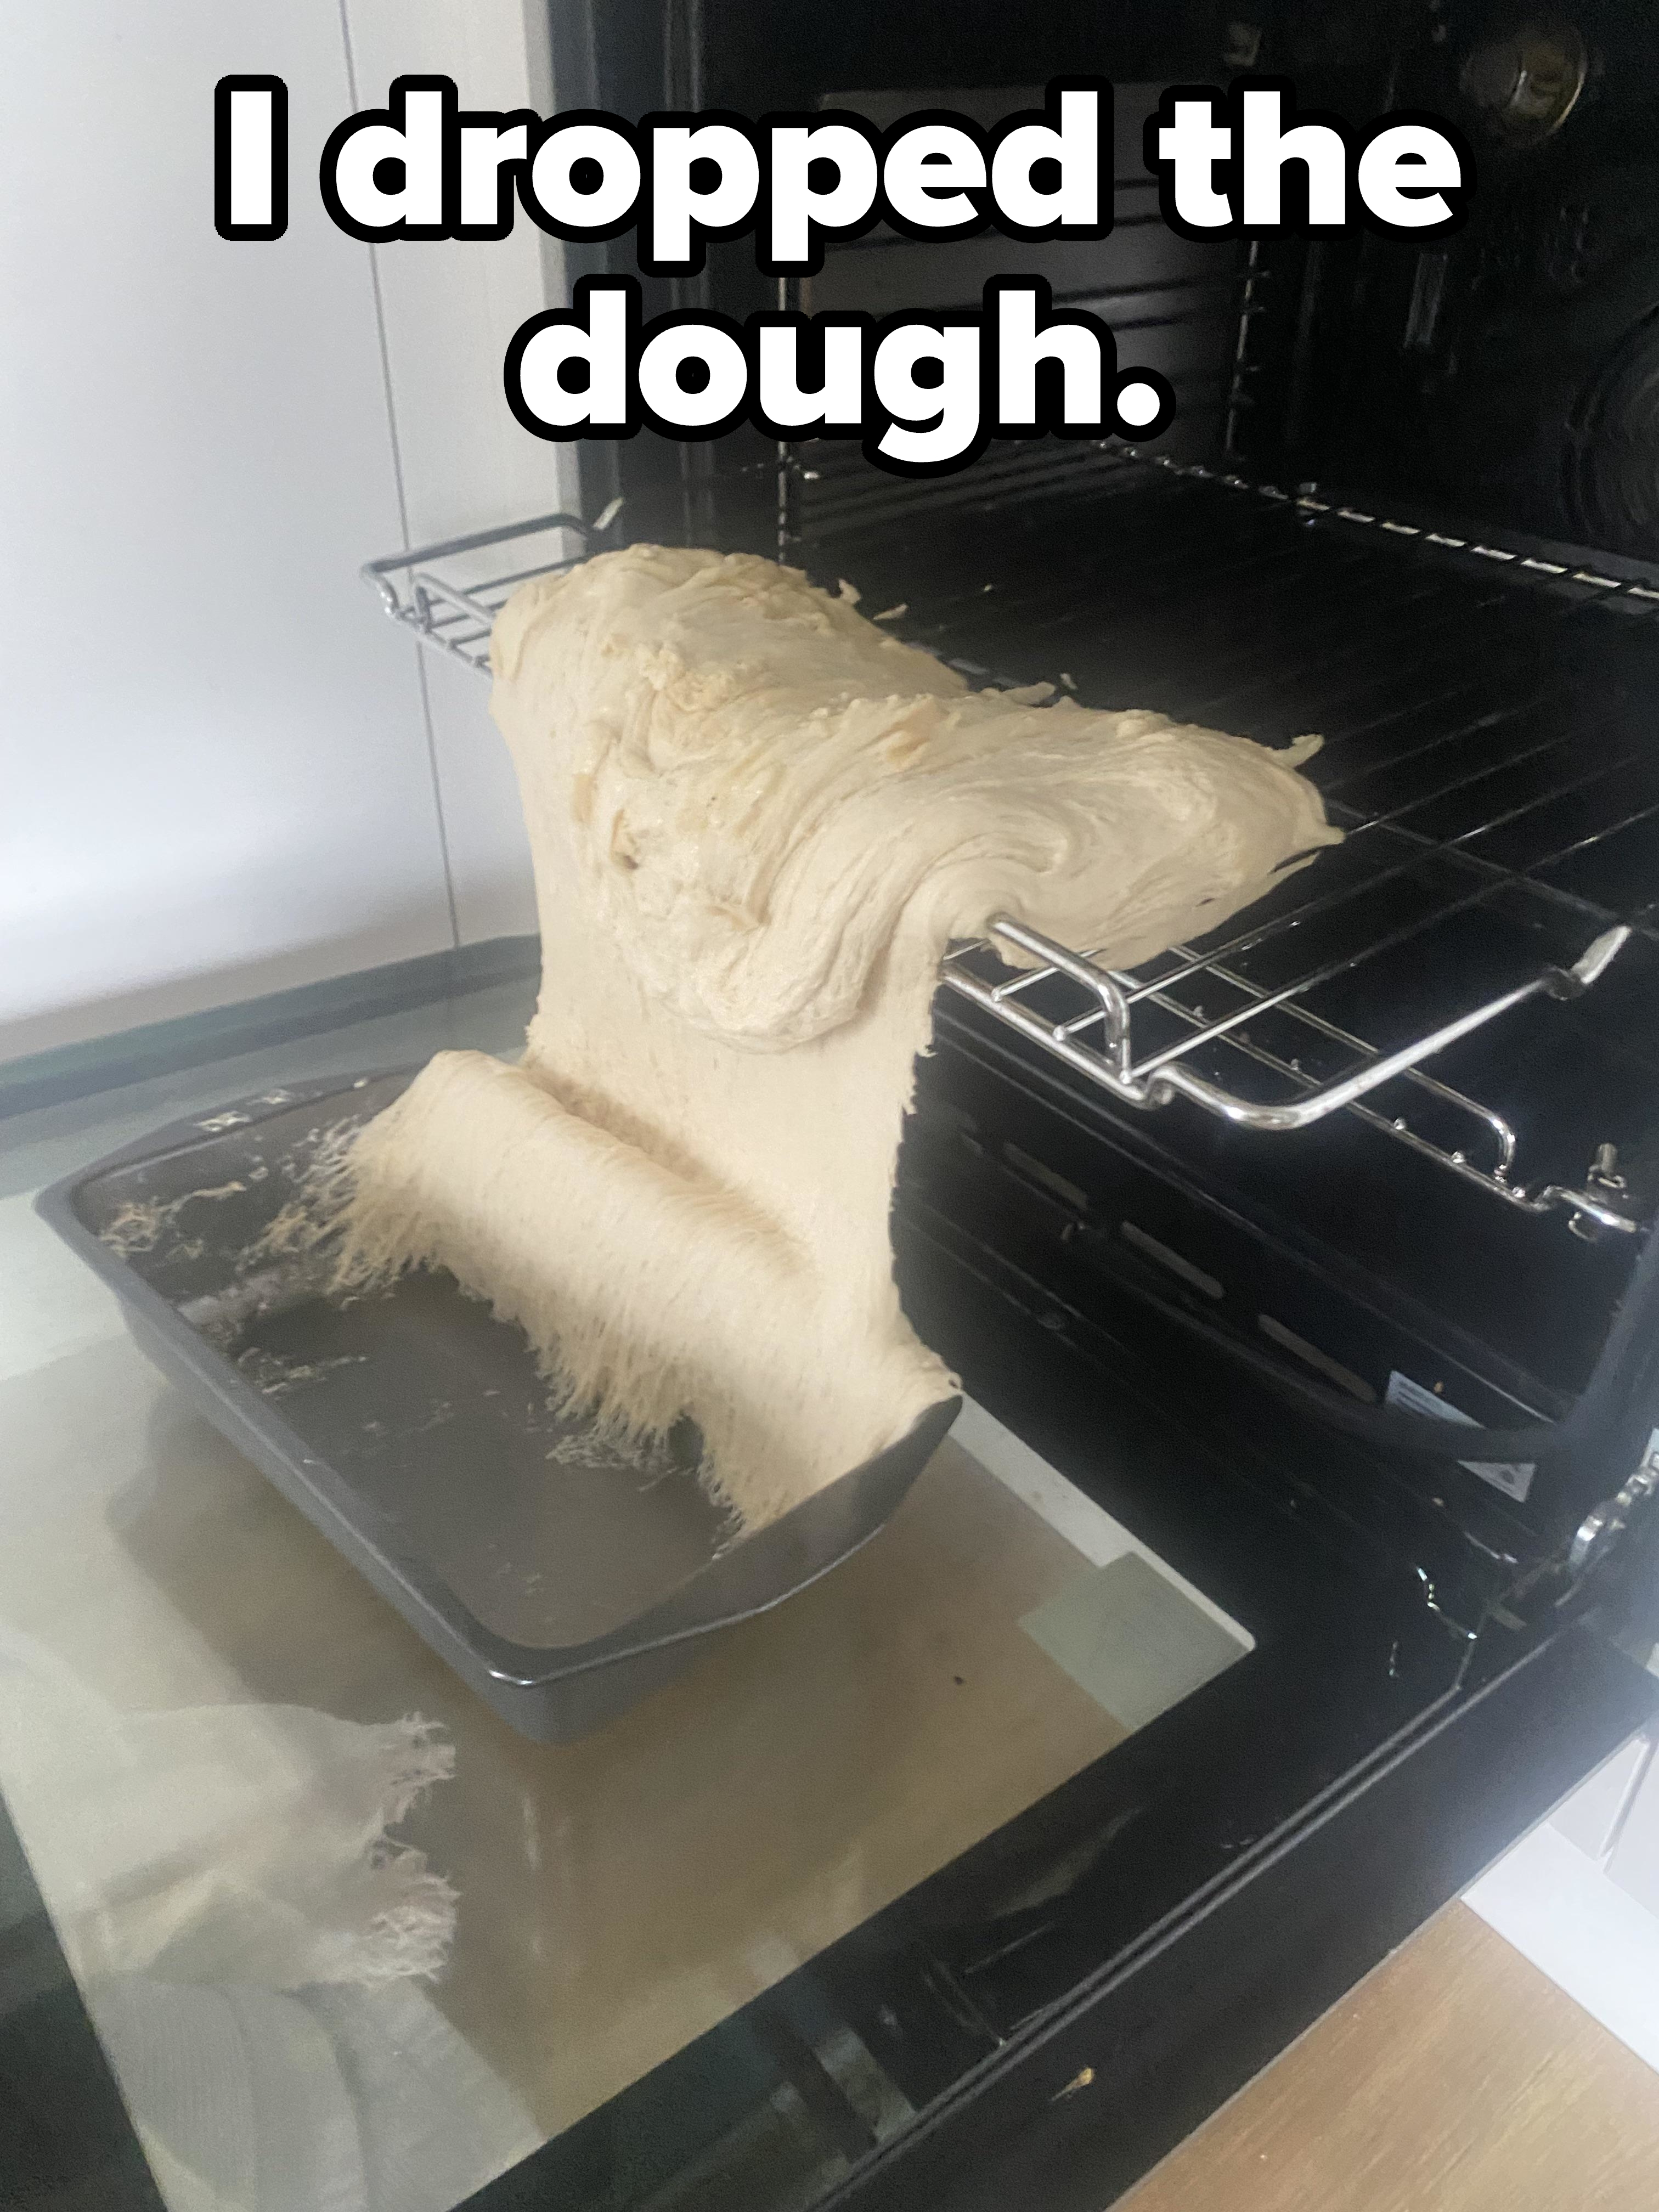 Dough spilling out of a pan to cover the shelf of an oven